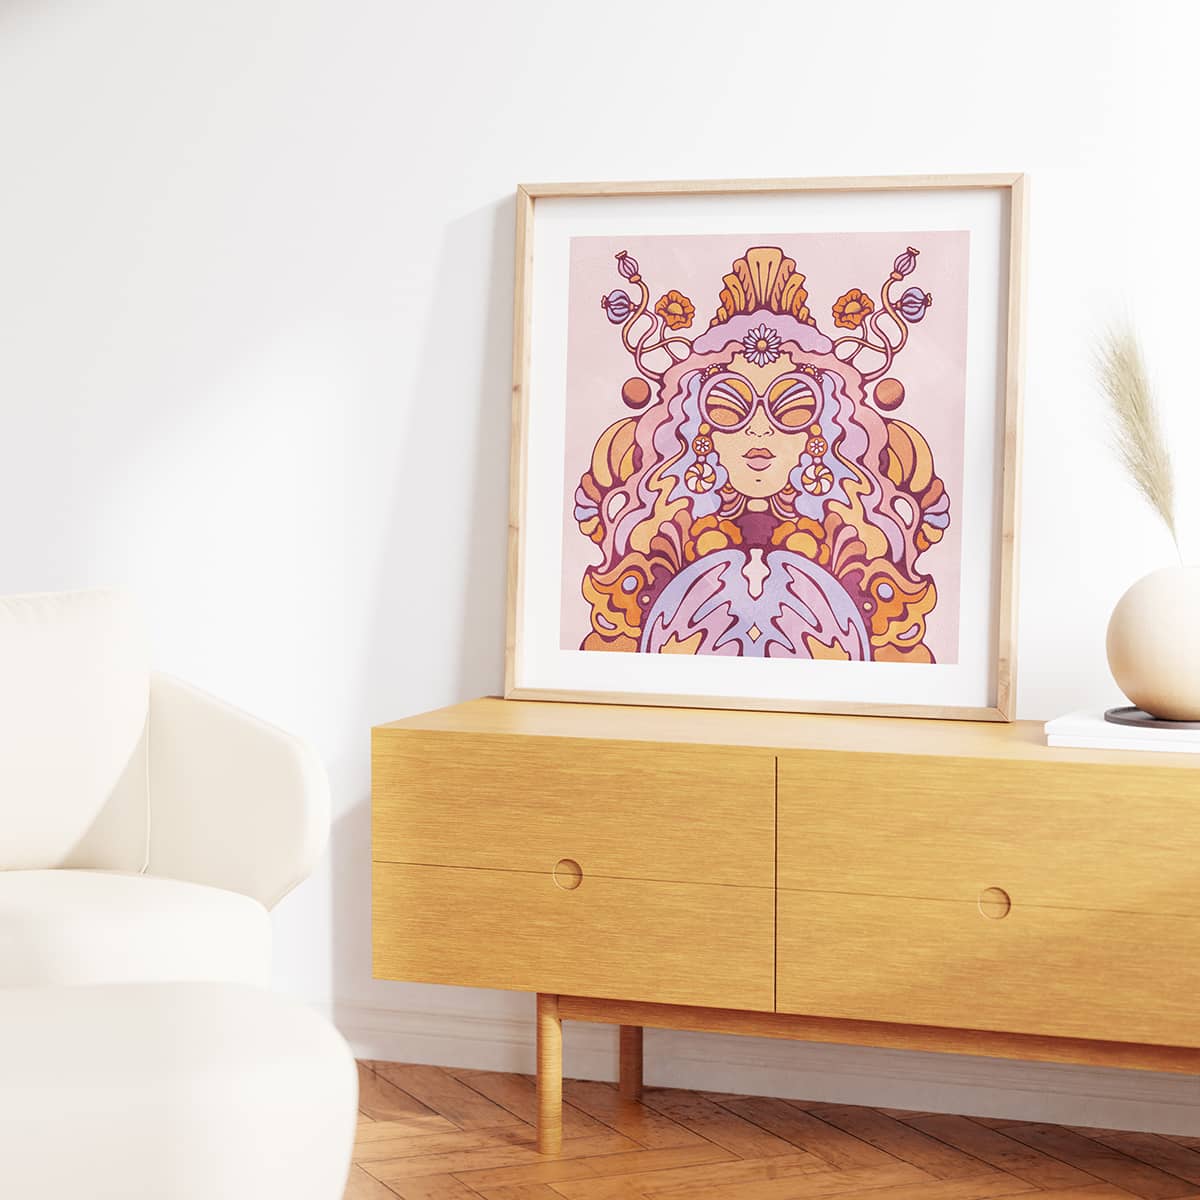 Vintage style purple and gold art print in wooden frame on a sideboard